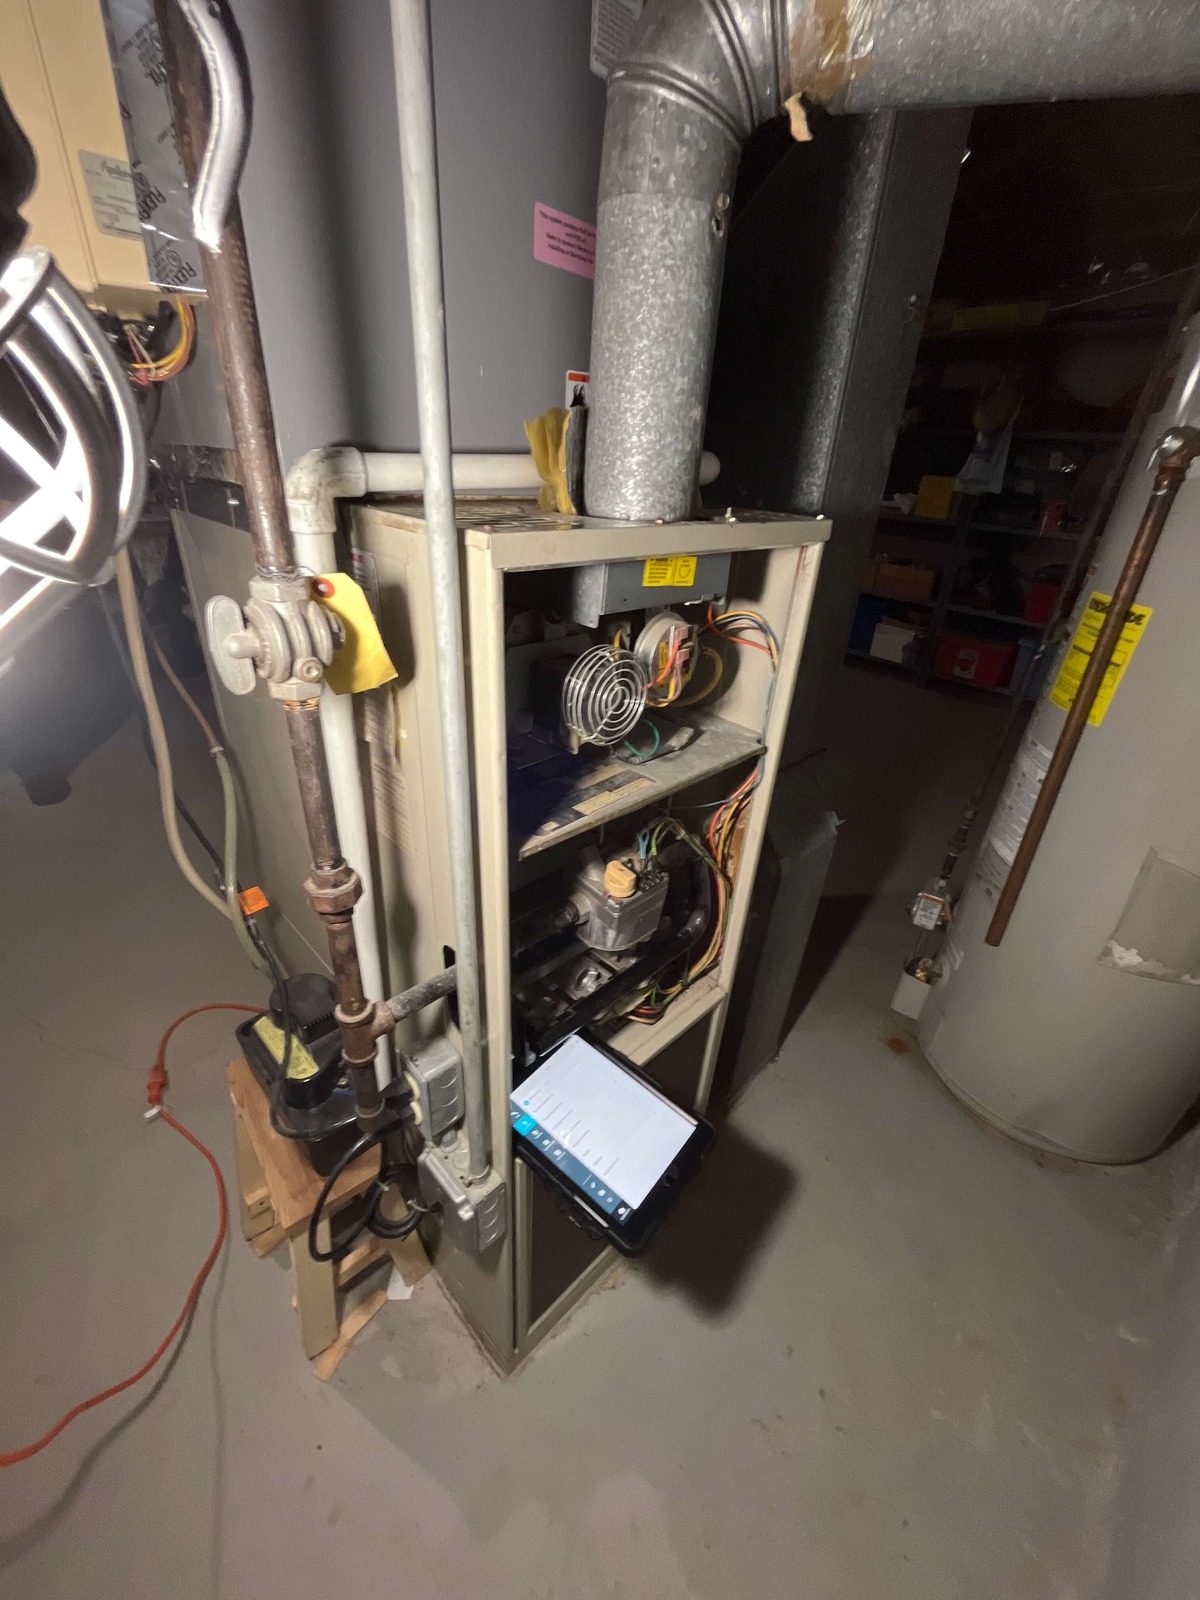 Furnace before replacement